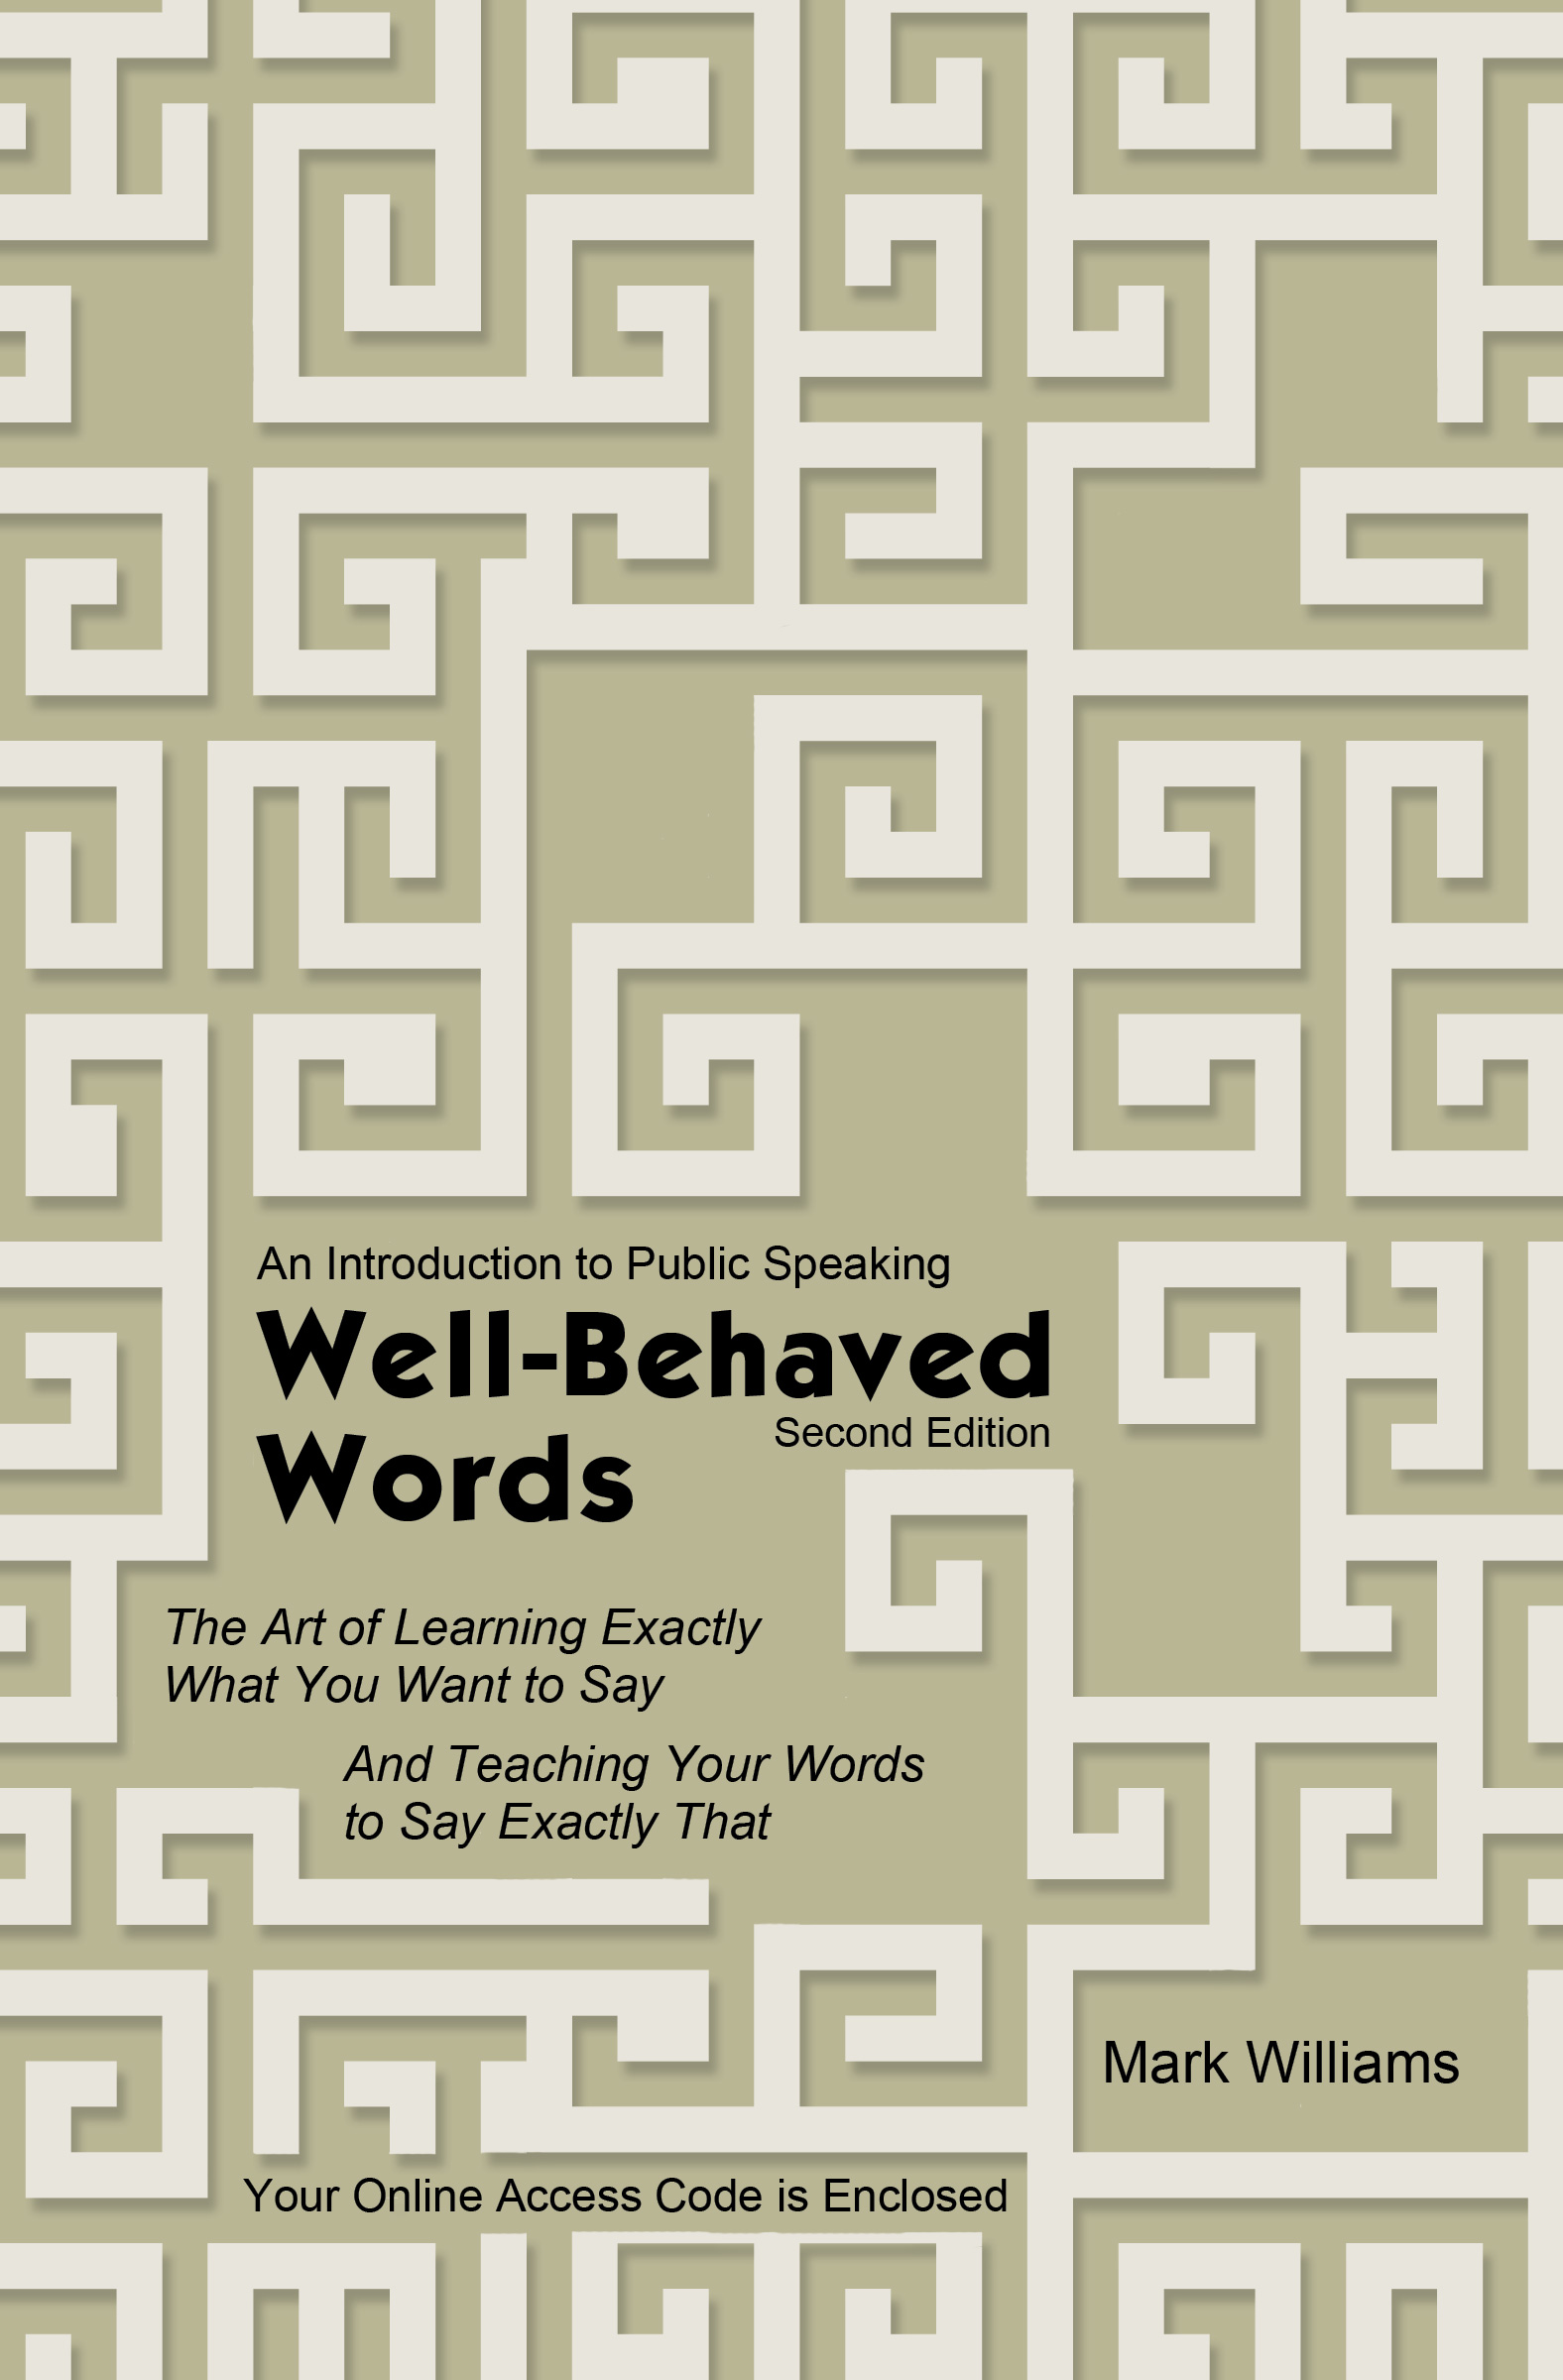 Product Details - Well-Behaved Words: The Art of Learning Exactly What You  Want to Say and Teaching Your Words to Say Exactly That - An Introduction  to Public Speaking